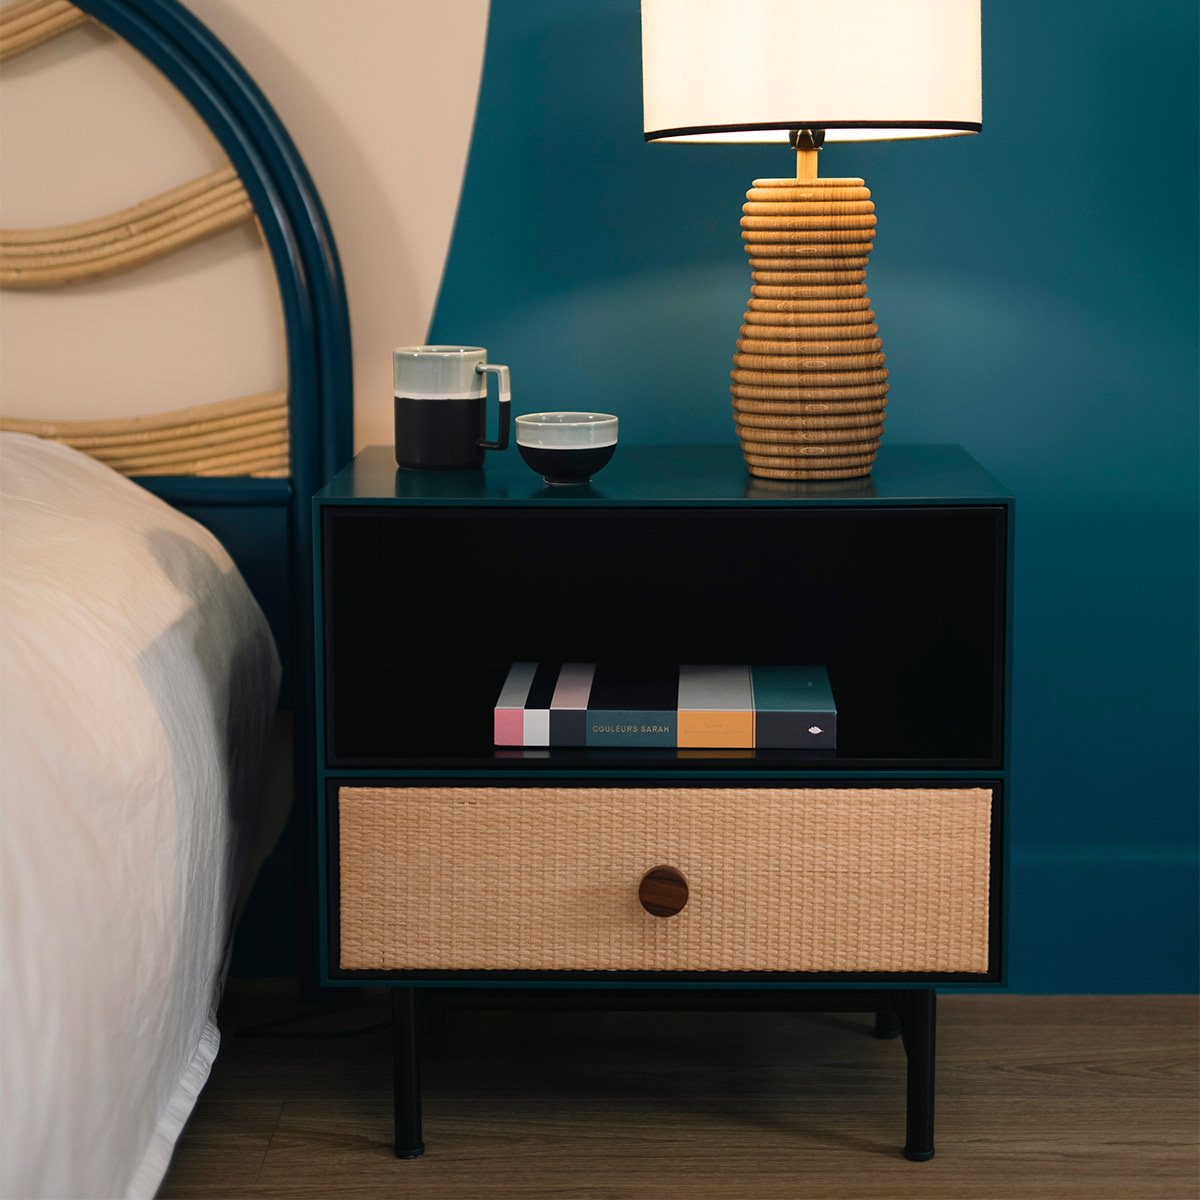 Bedside Table Essence, Black / Ivory - LL55 x W38 x H55 cm - Lacquered wood - image 10